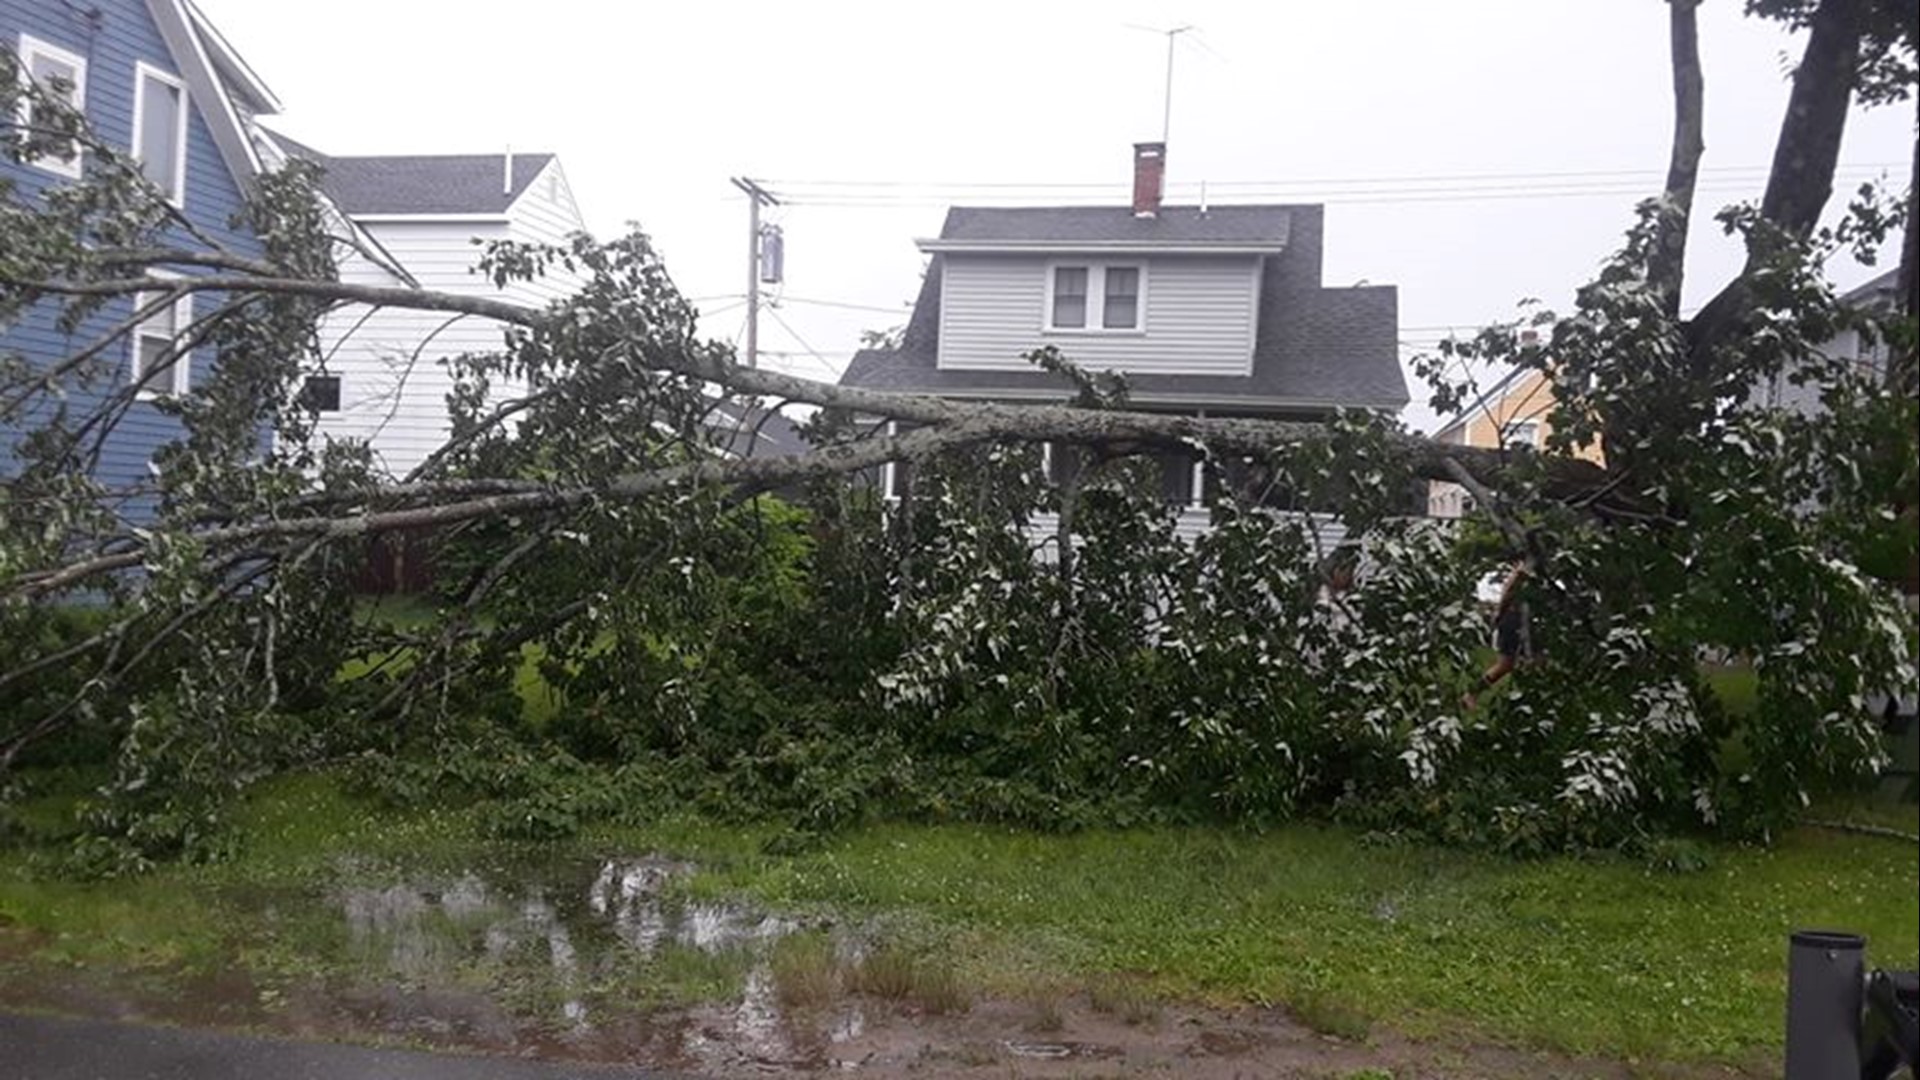 Viewer photos of storm damage and clouds across Maine